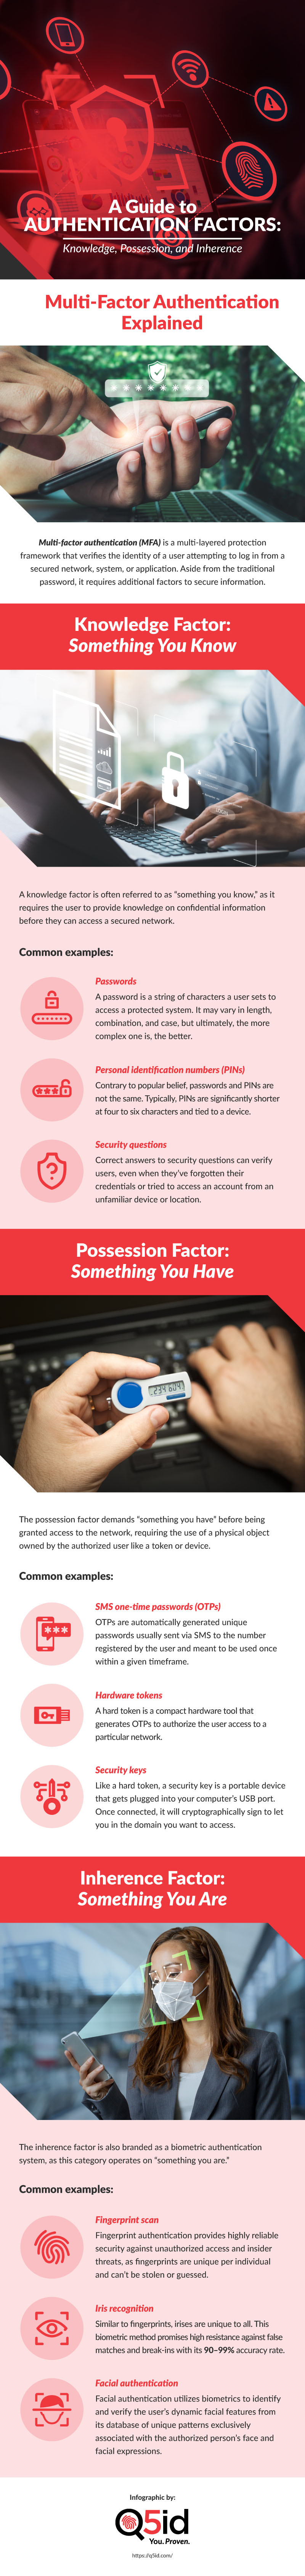 Knowledge, Possession, and Inherence: A Guide to Authentication Factors